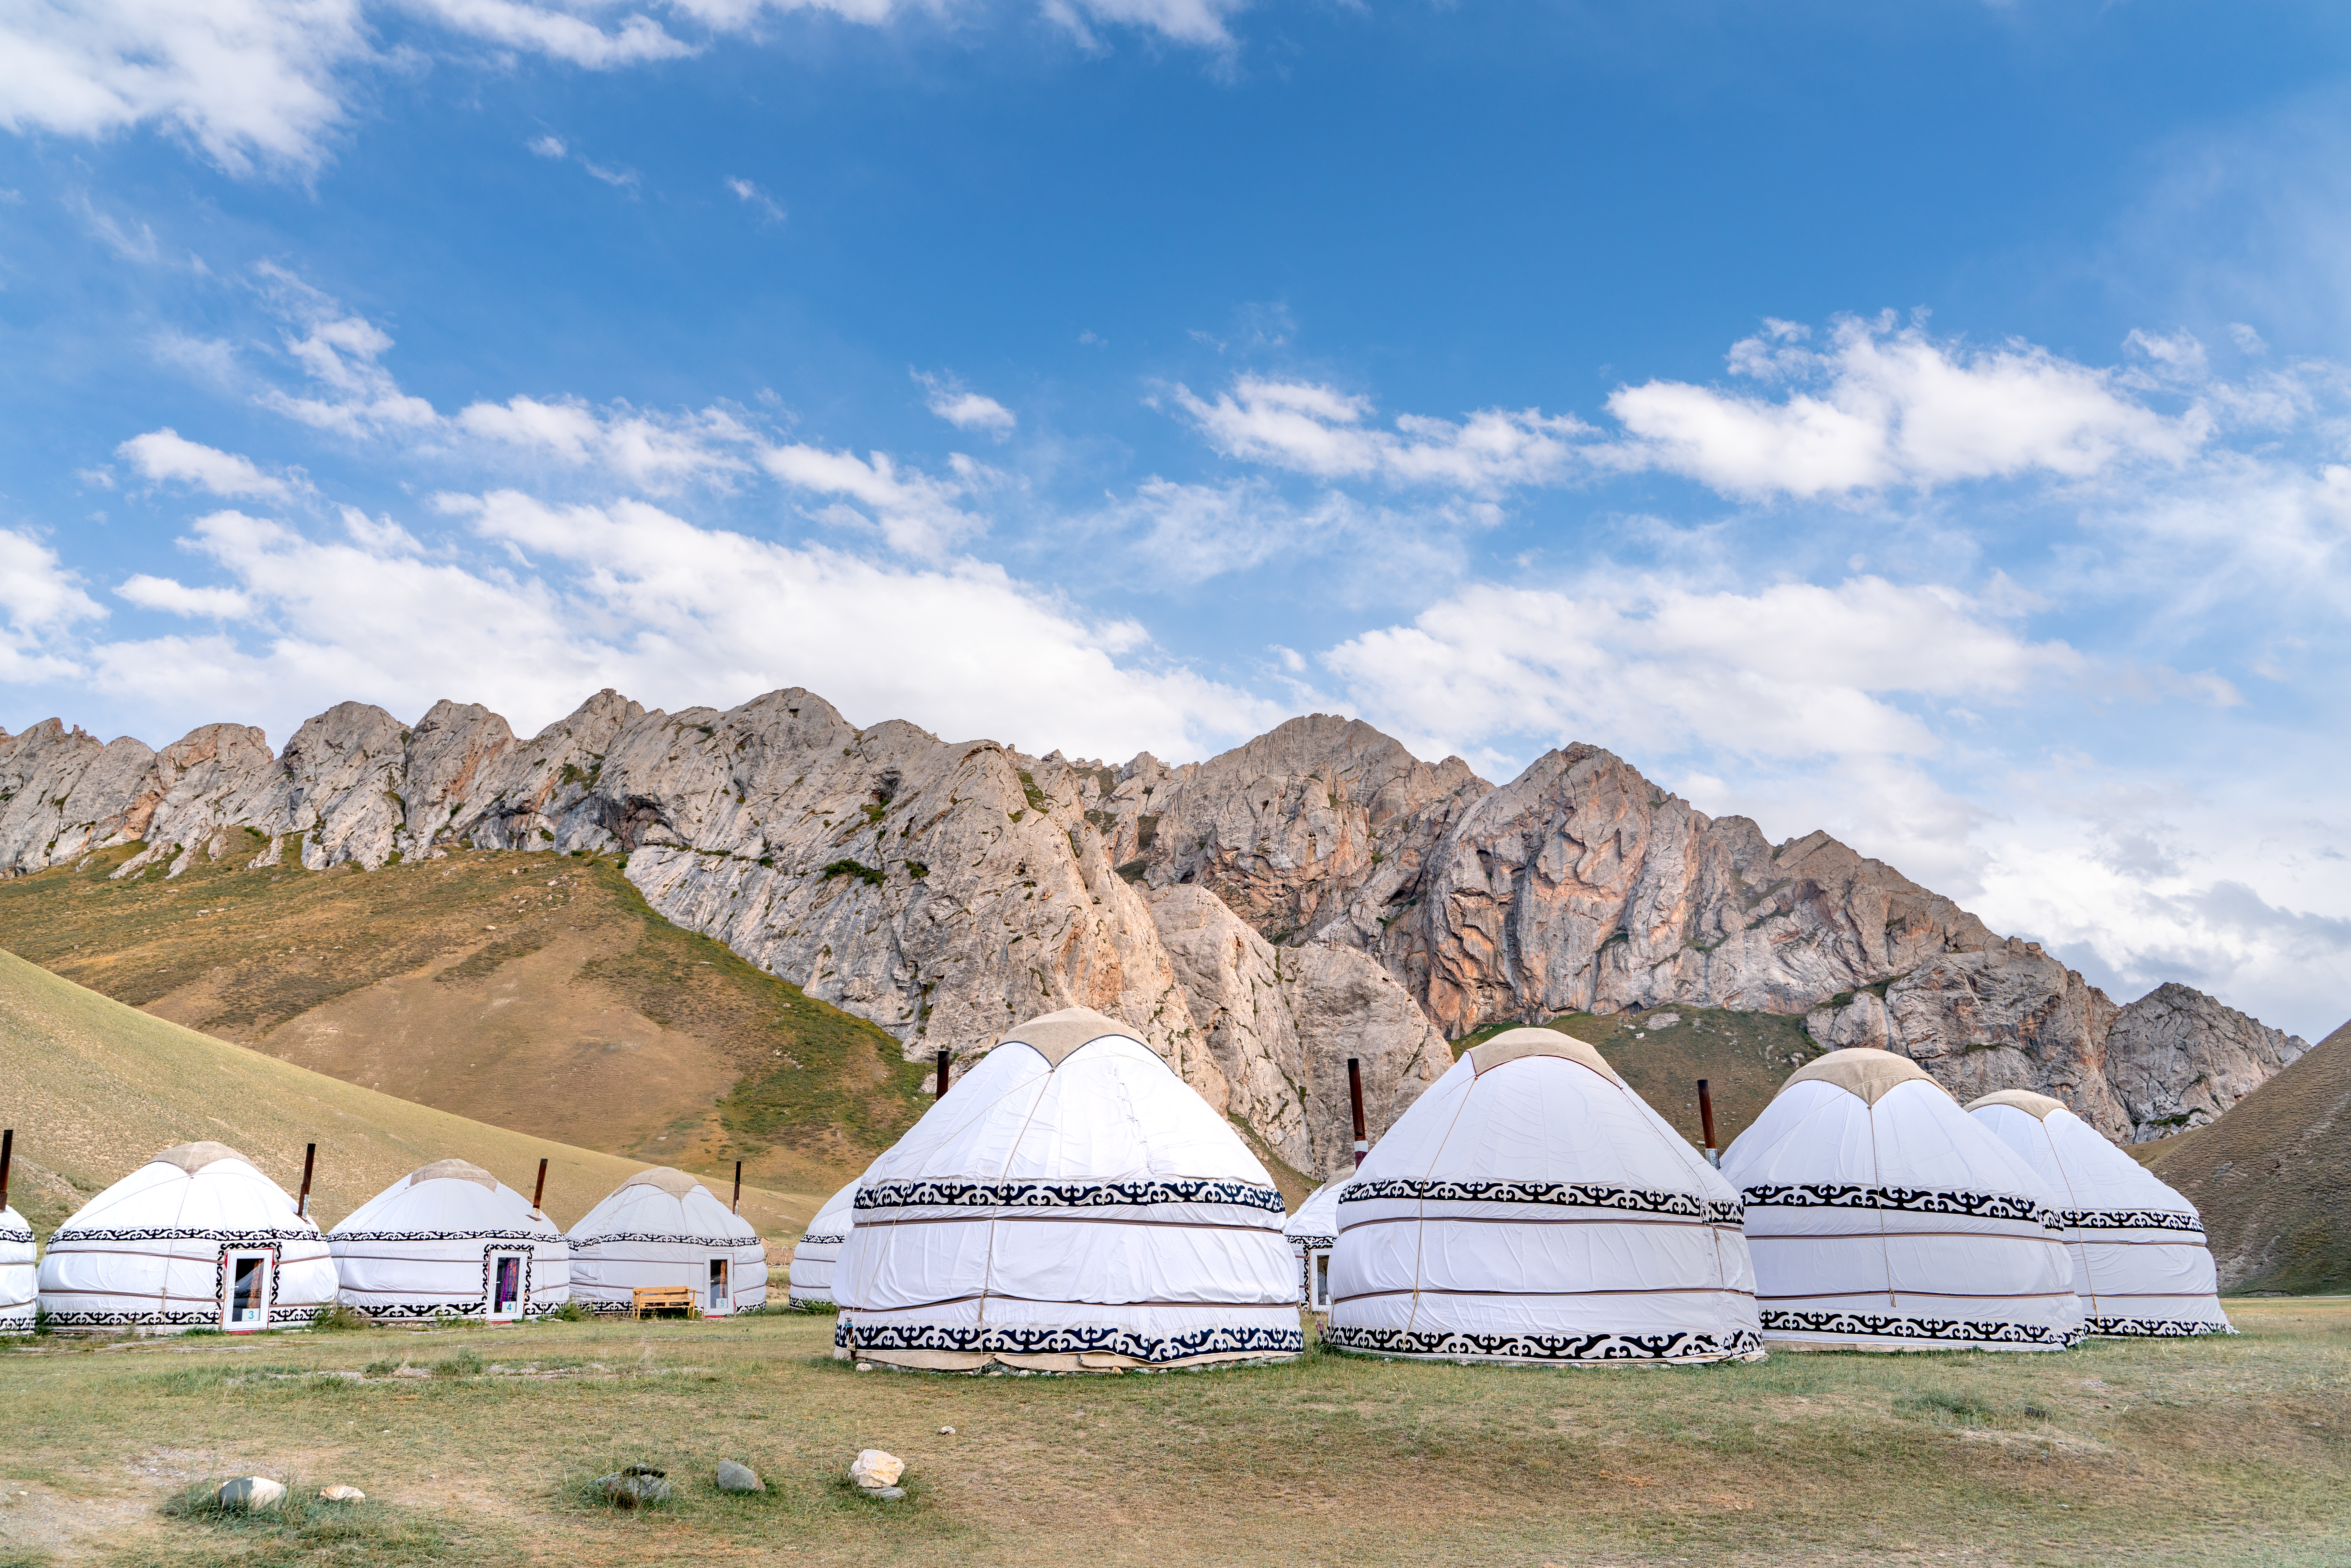 Traditional yurts village – © Nomad1988 / Shutterstock